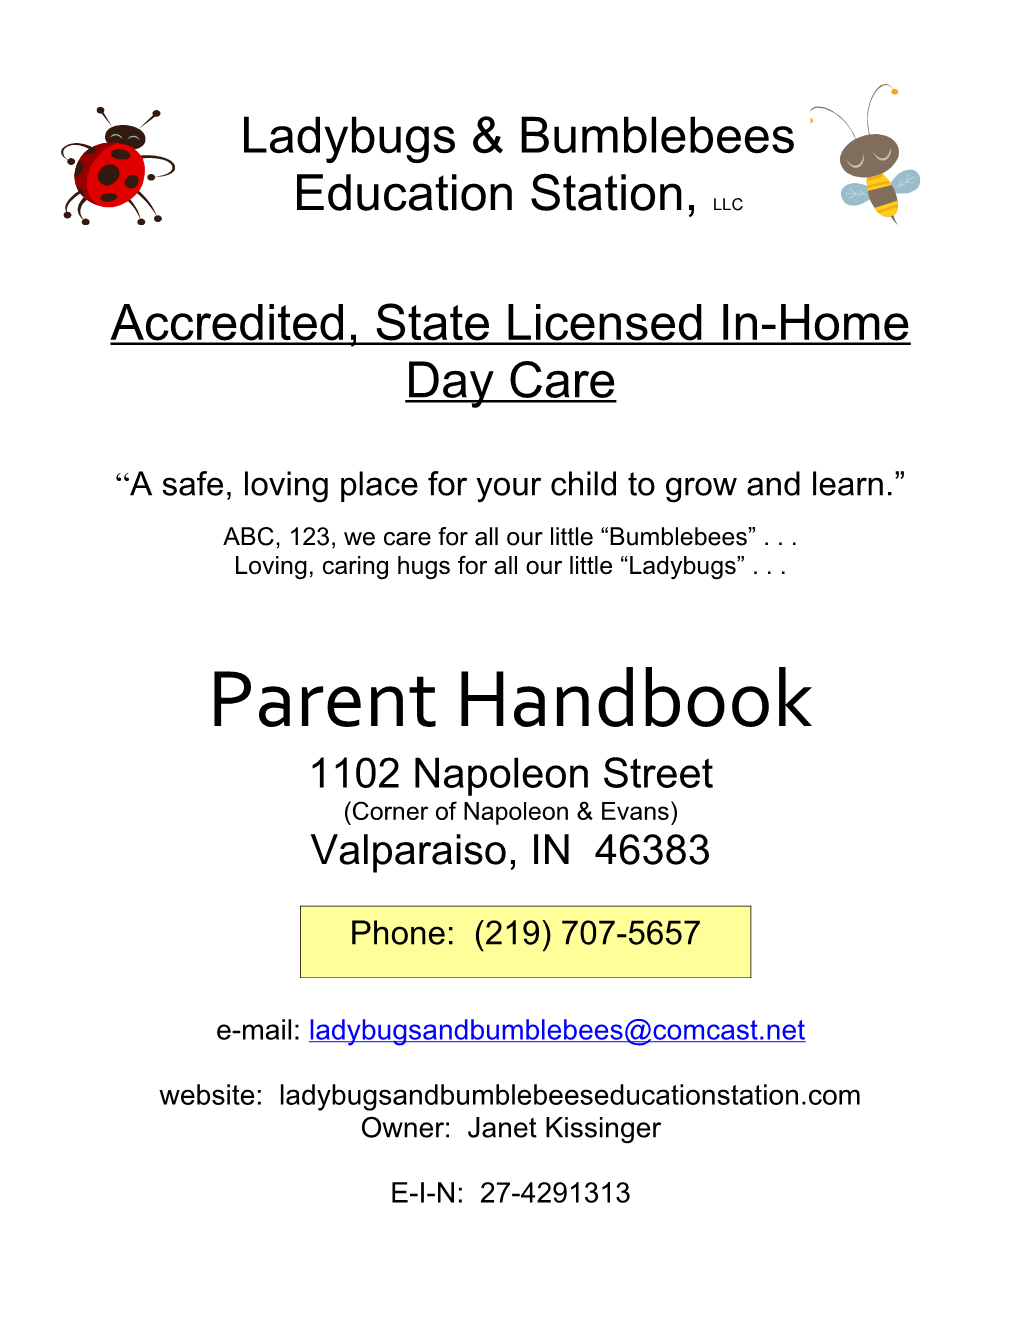 Accredited, State Licensed In-Home Day Care